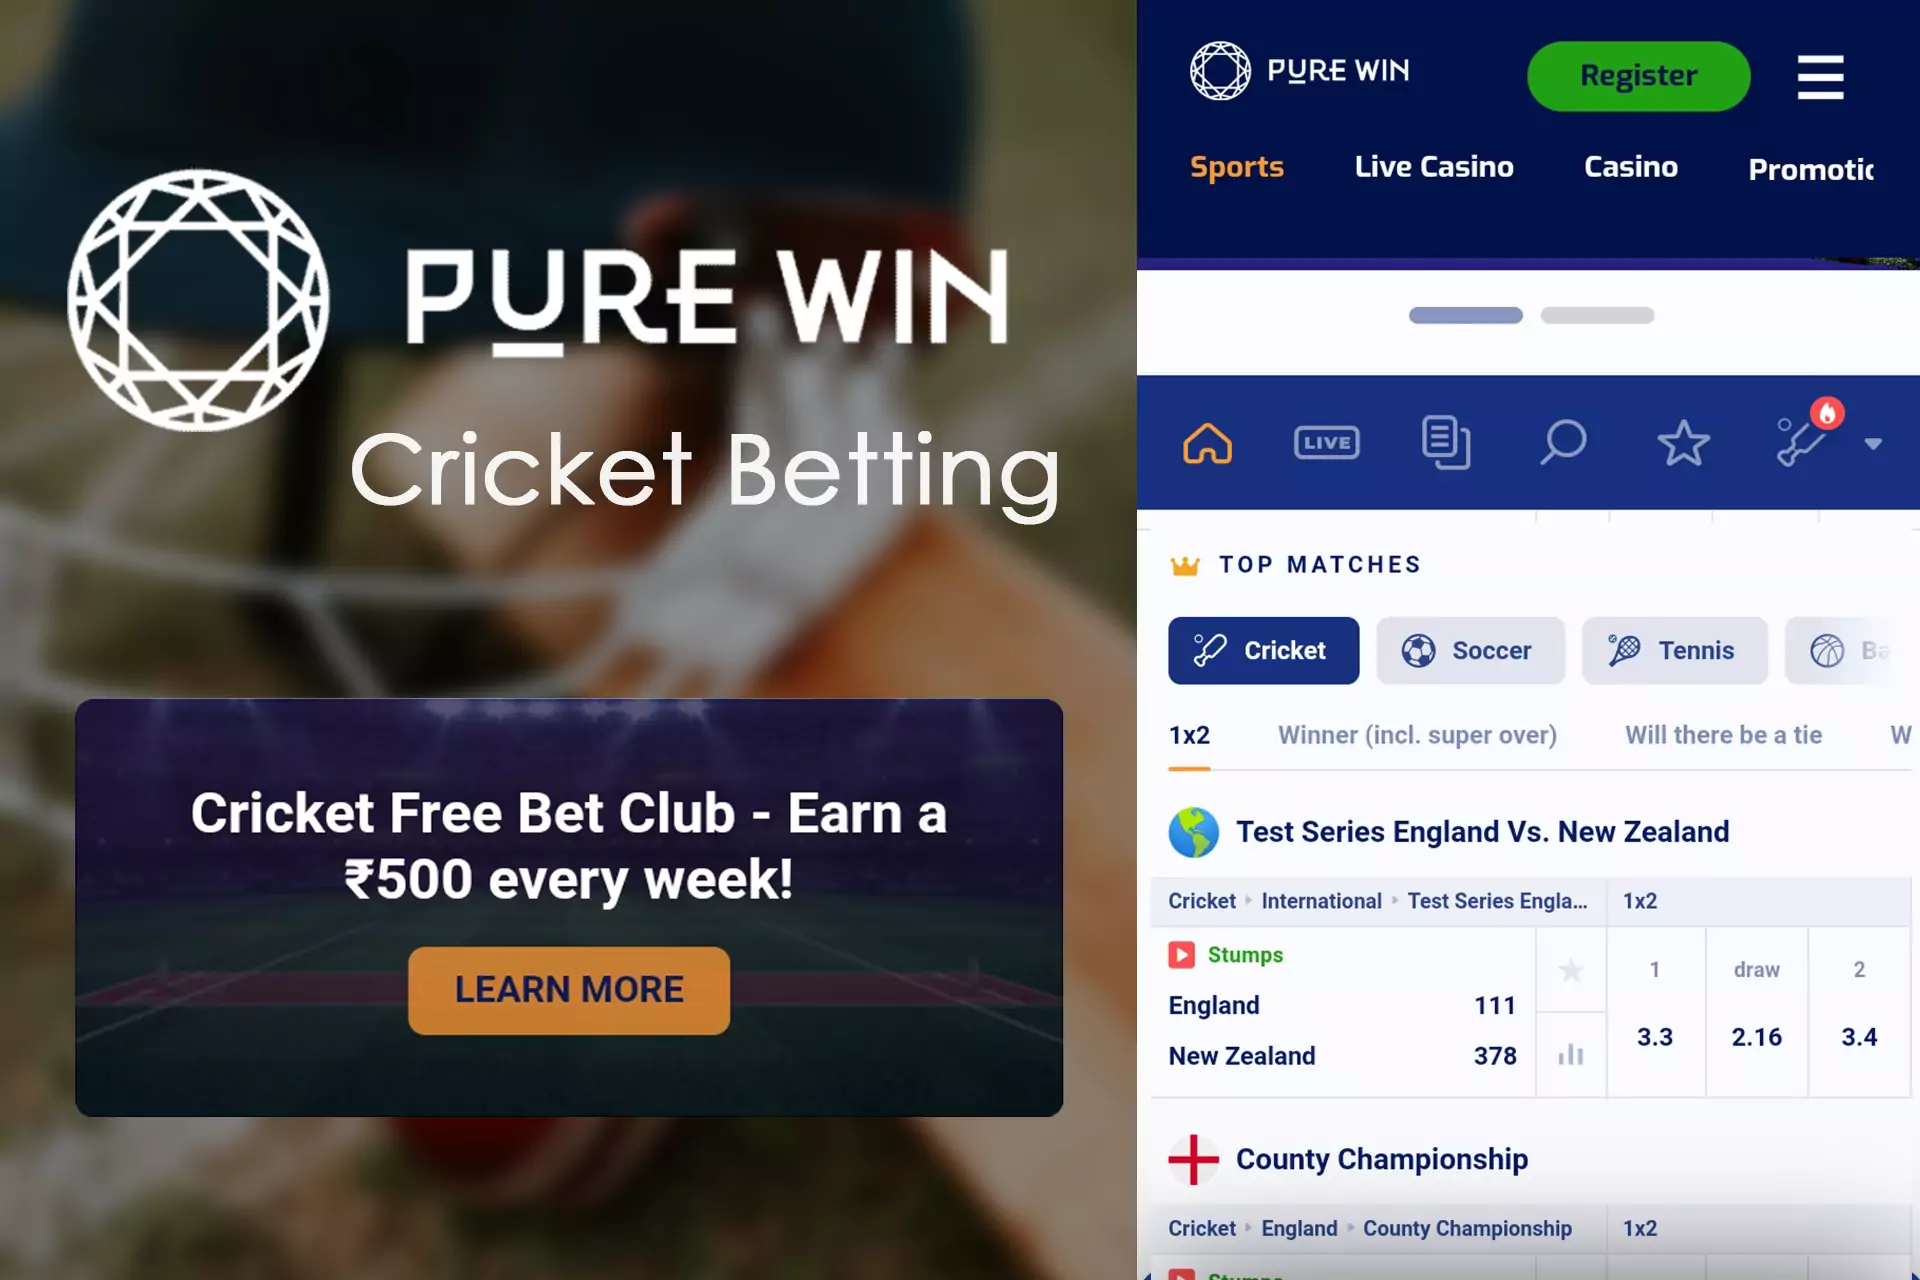 Cricket betting is as simple as betting on another sport.